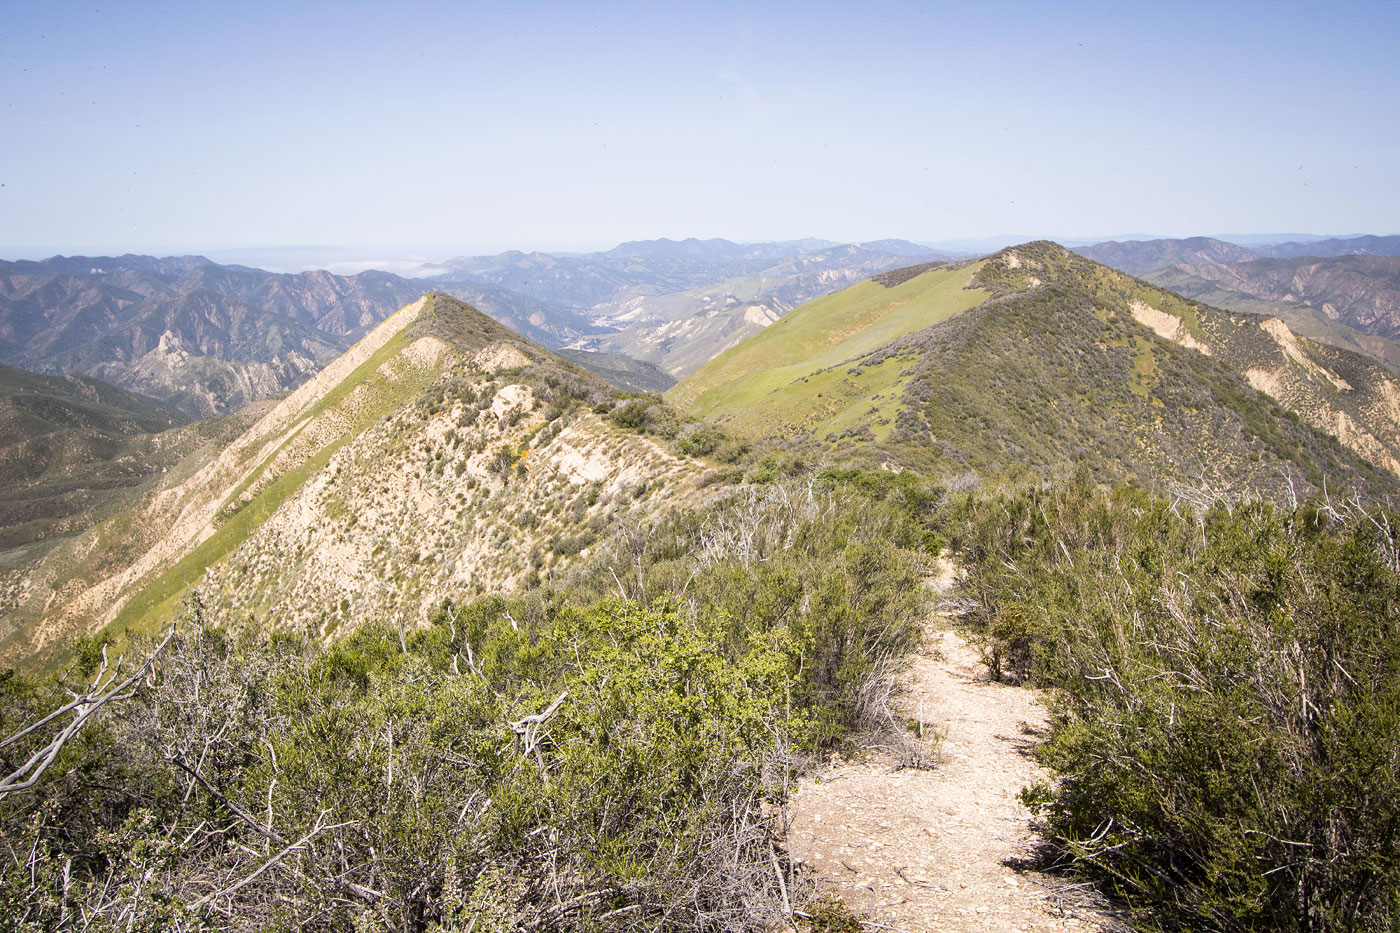 Hike Hurricane Deck in Los Padres National Forest, California - Stav is Lost